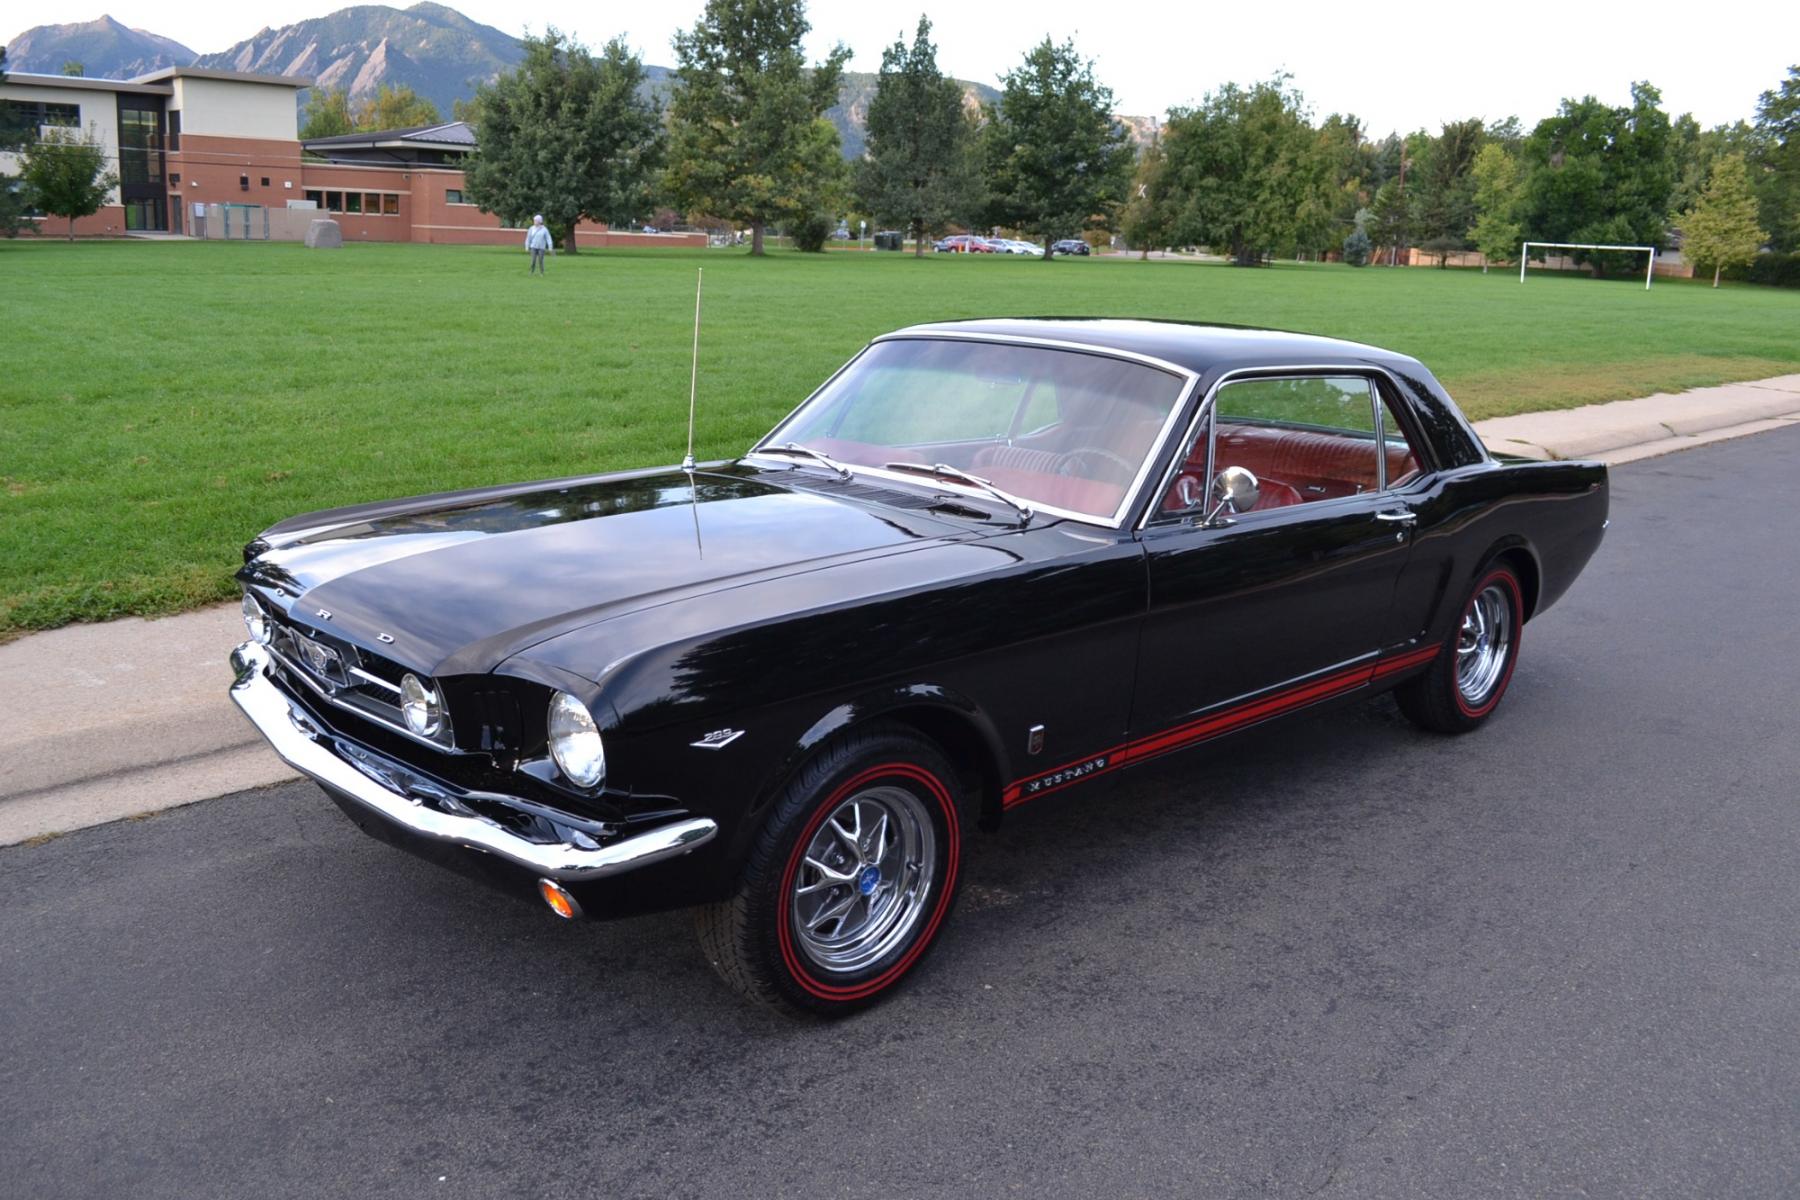 1965 Black /Red Ford Mustang GT (5T07A144229) , located at 2510 47th St. Suite 200, Boulder, CO, 80301, (303) 641-0333, 40.026196, -105.243217 - COMING SOON 44 year owned Original 1965 Mustang GT. Fresh Nut and Bolt Piano Finish Restoration. Finished Sept. 6, 2023. 12 Miles since finished. First Time Shown. Built by Retired Ford Dealer and Non Stop Mustang Owner/Collector and Restorer since 1964 Max Hanson, Hanson Ford, Clay Center Kansa - Photo #1